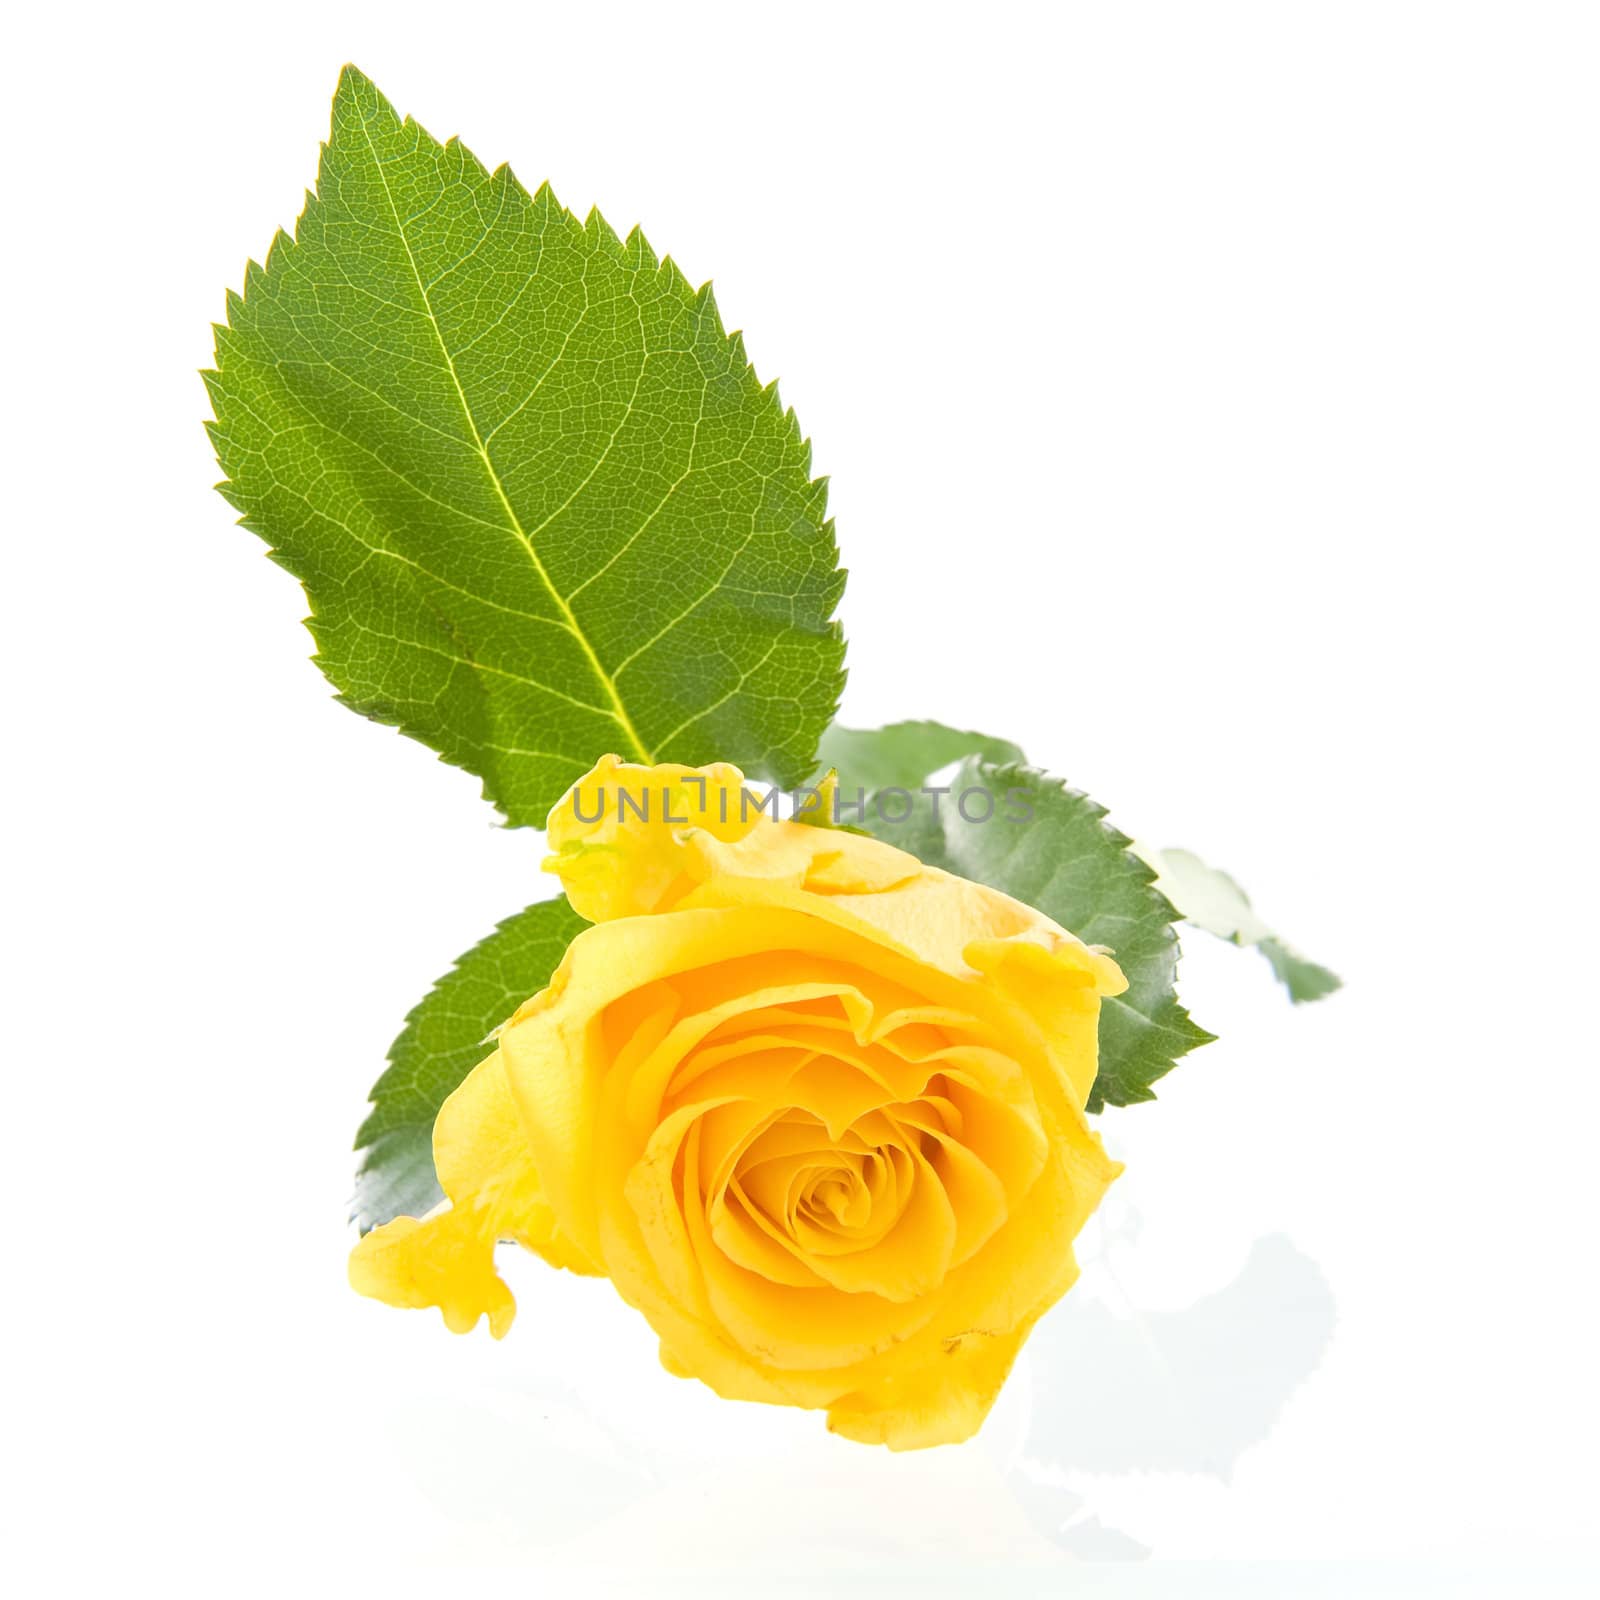 A beautiful yellow rose on a white background